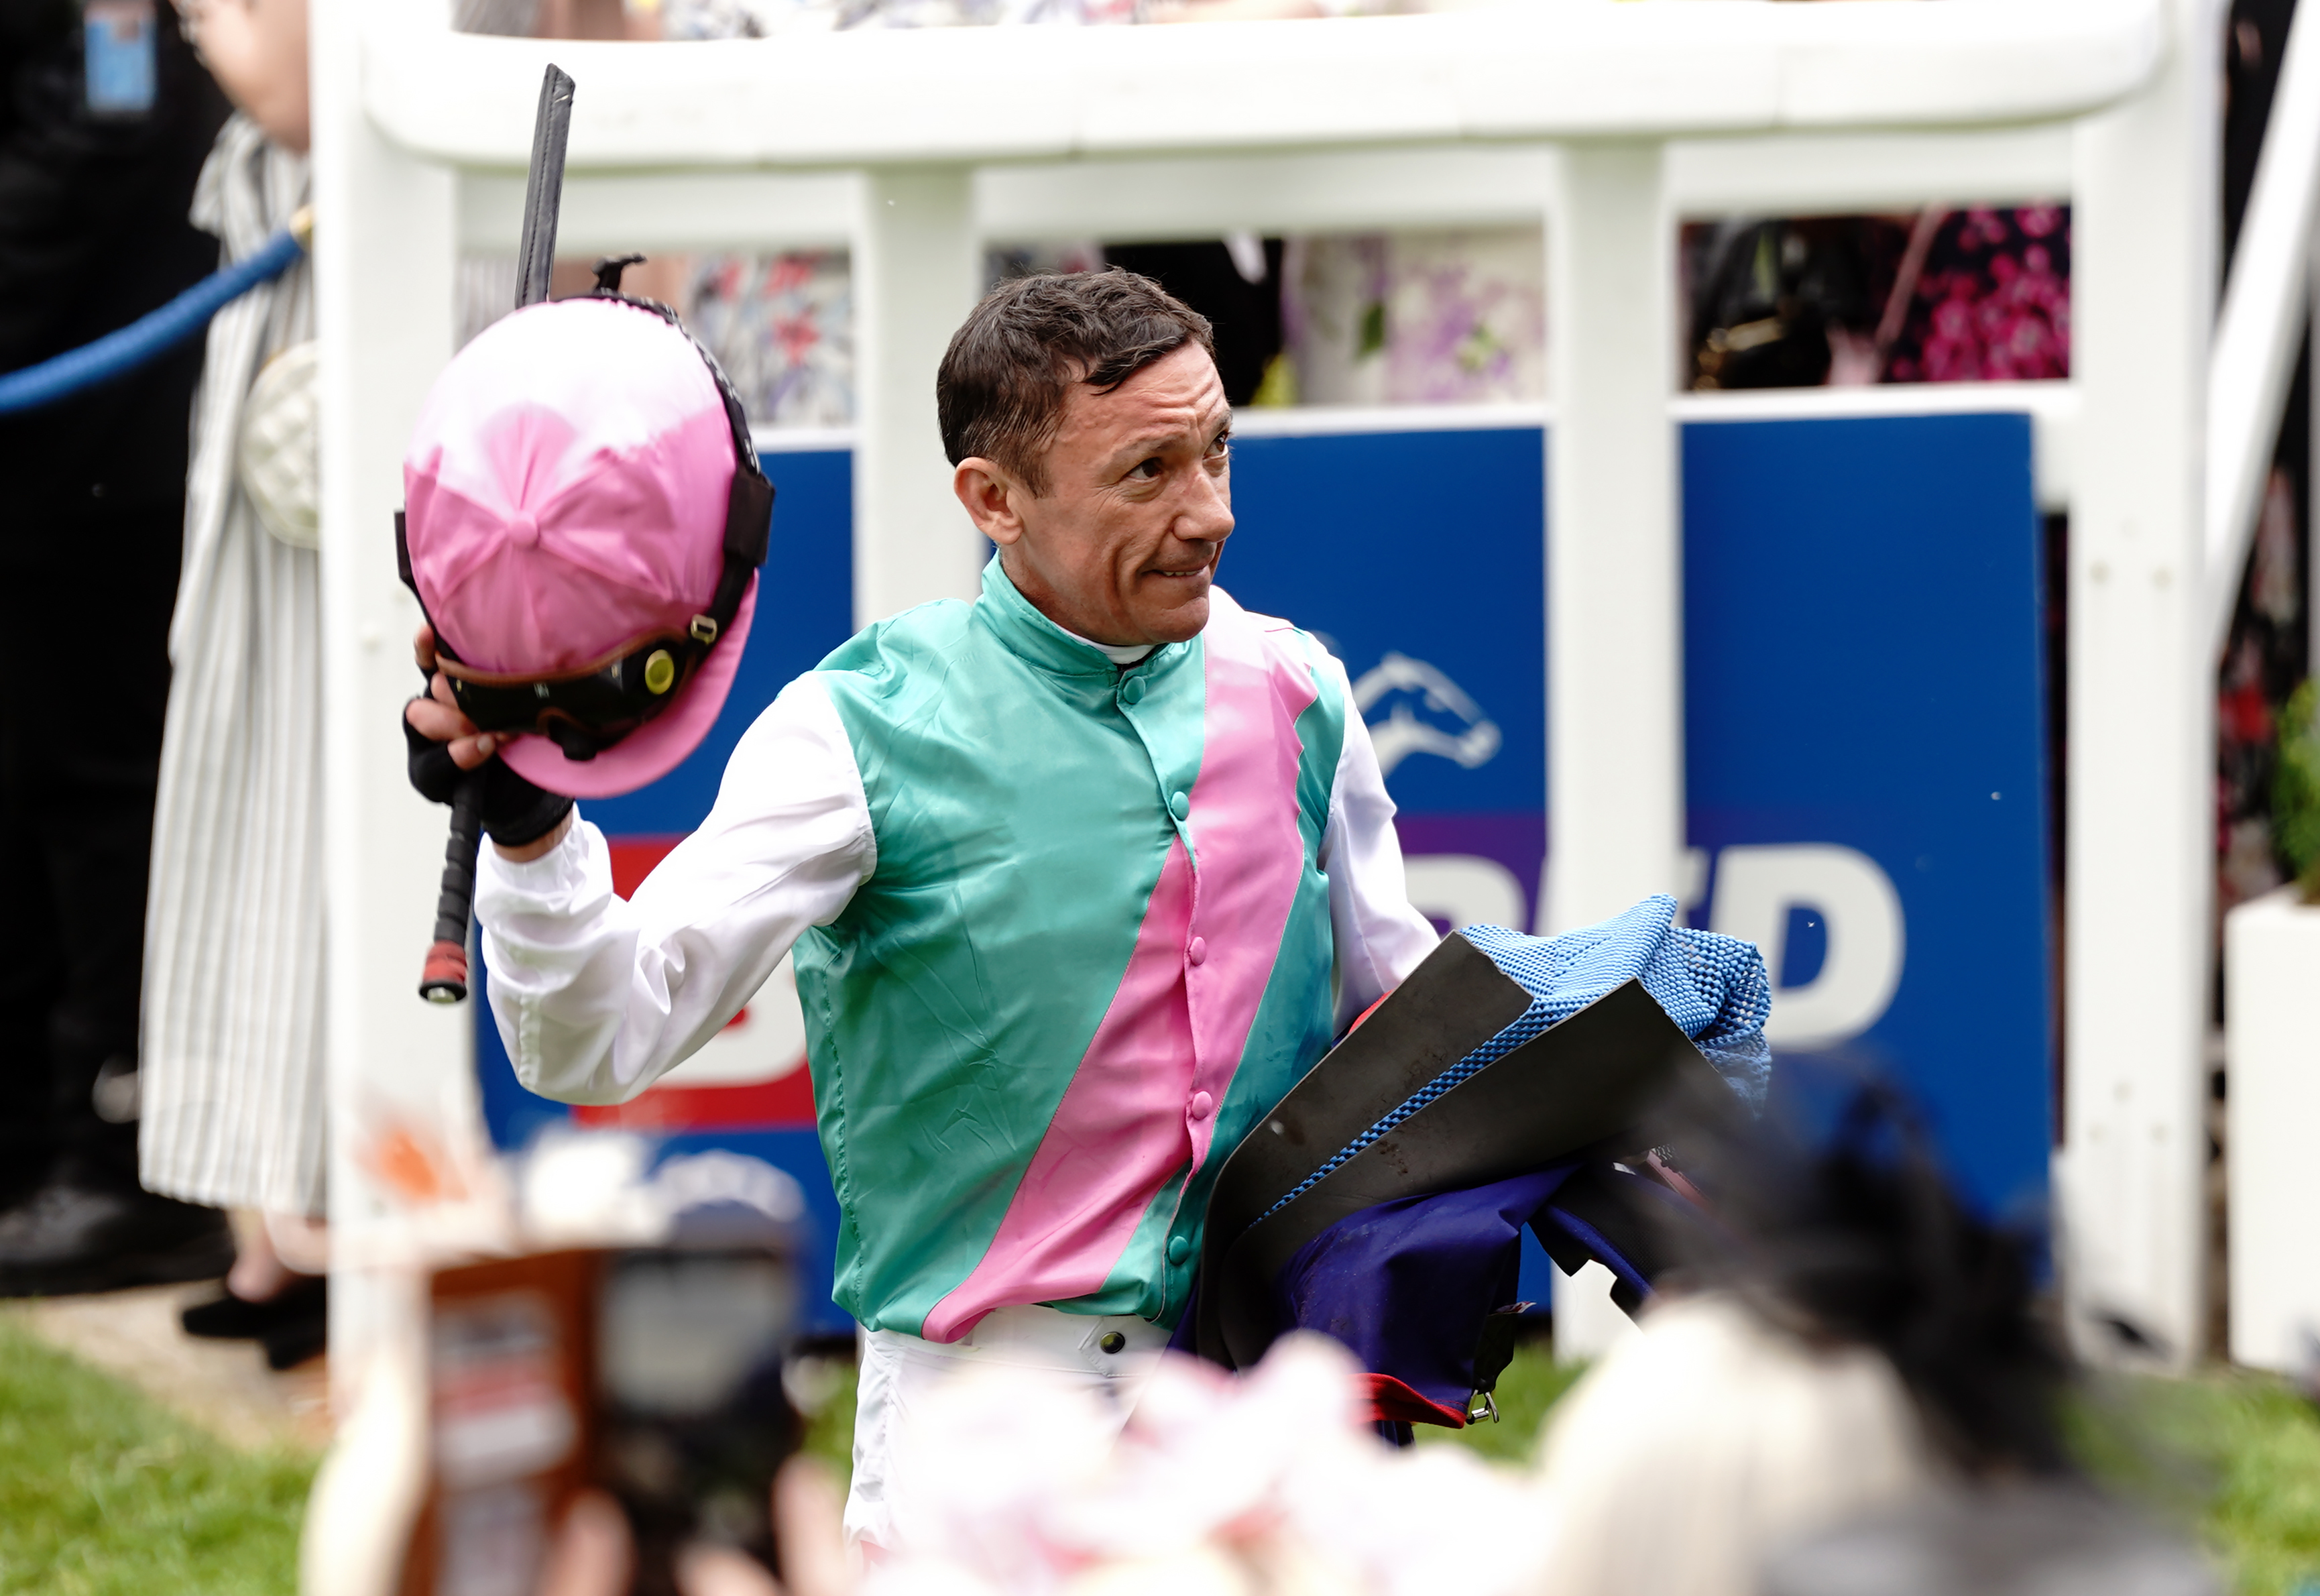 Frankie Dettori after riding in his final Derby at Epsom